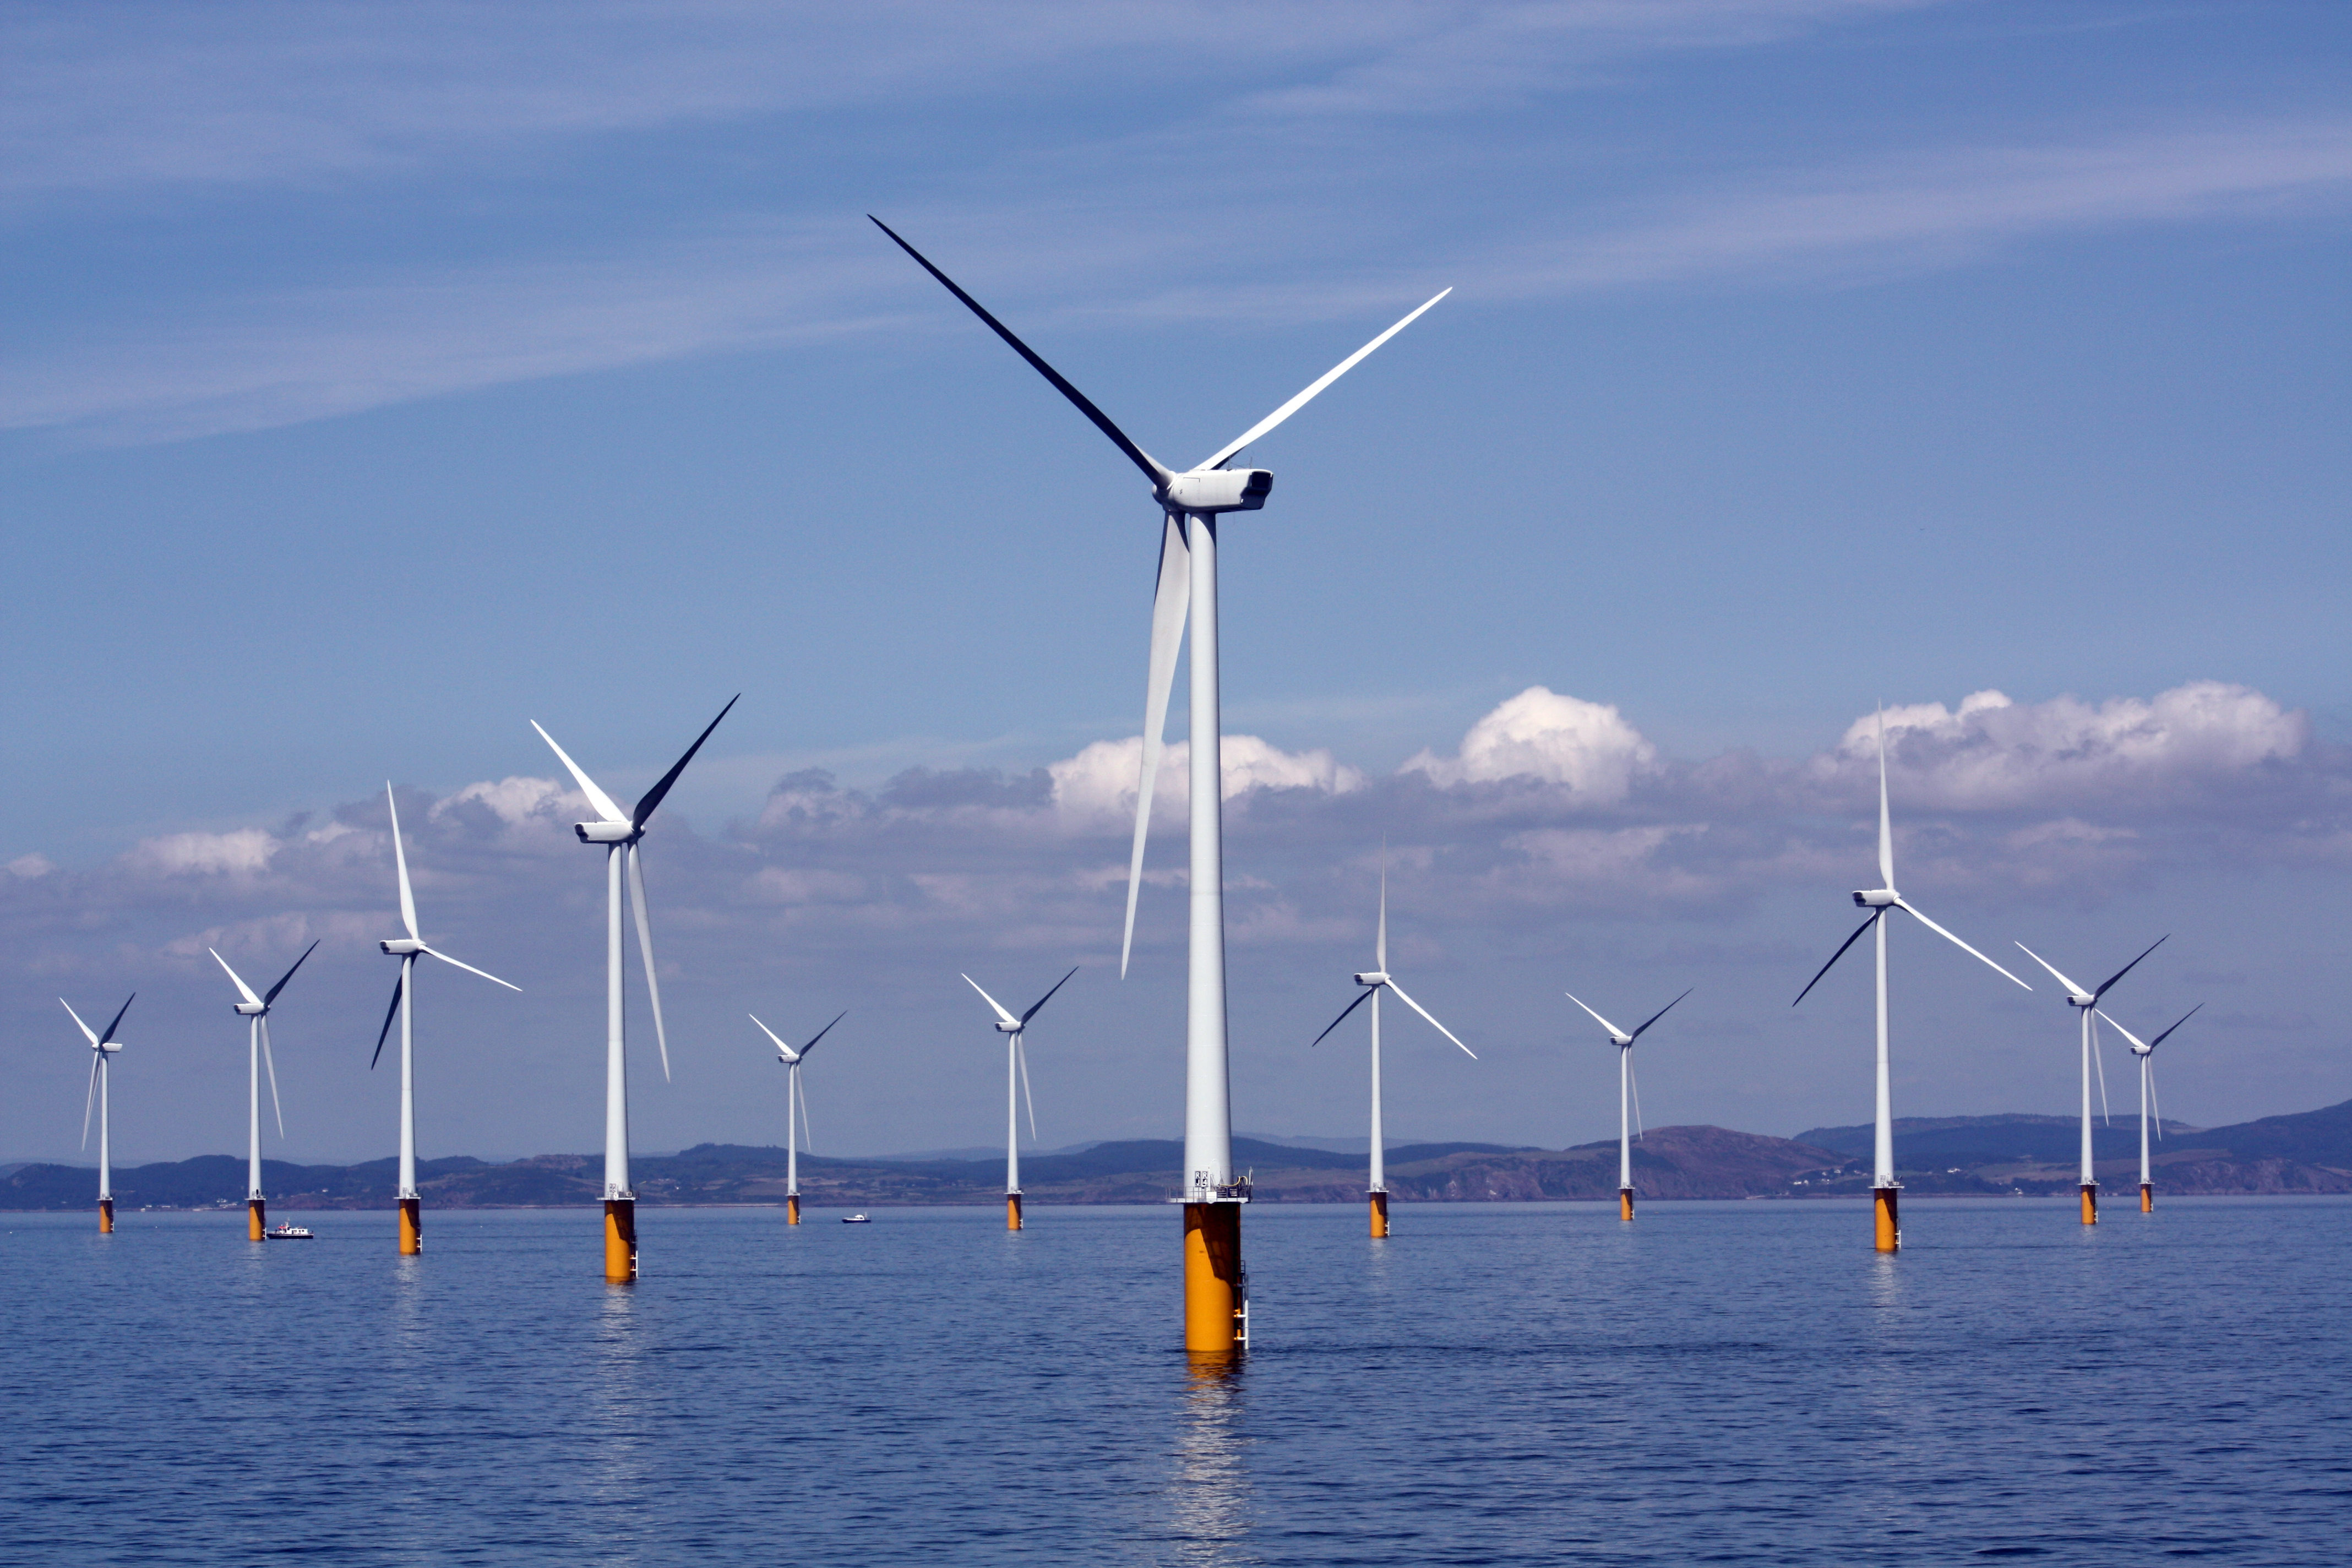 Offshore Wind Turbine Project Faces Challenges